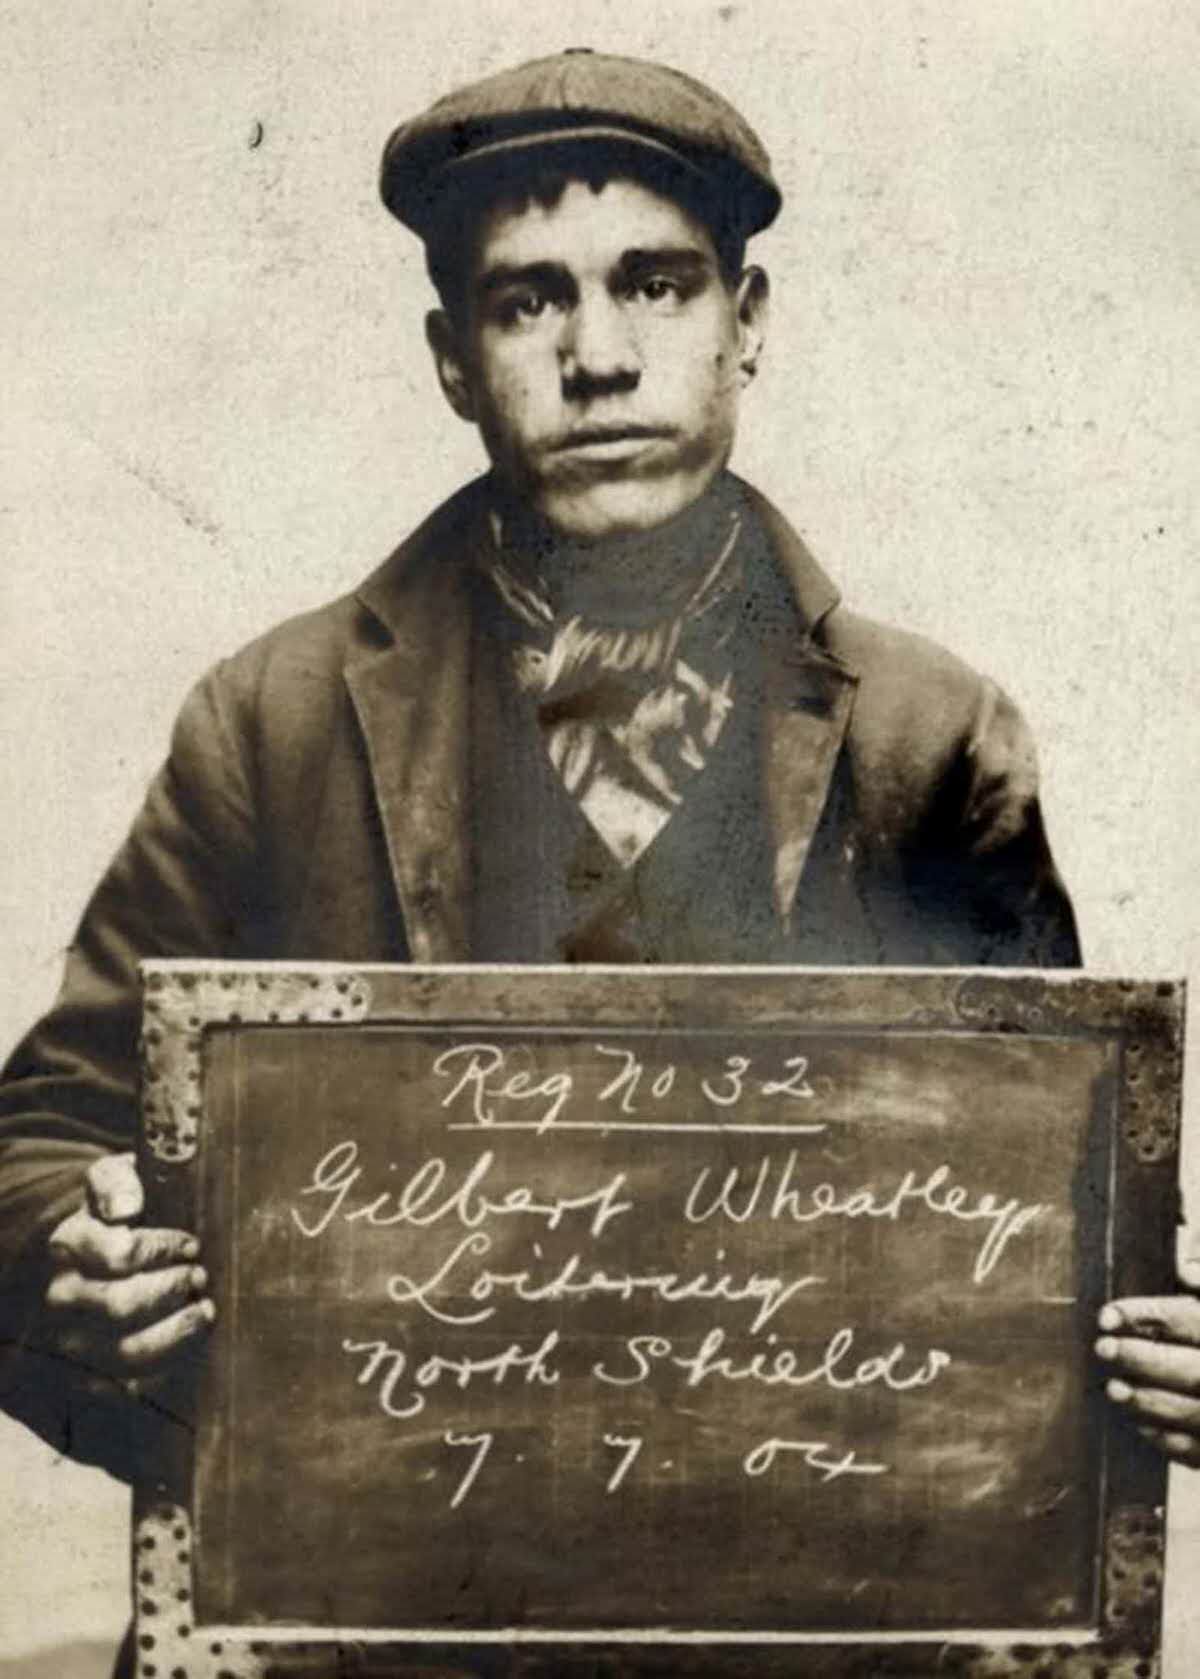 Gilbert Wheatley, 19, arrested for loitering with intent to commit a felony, 1904.